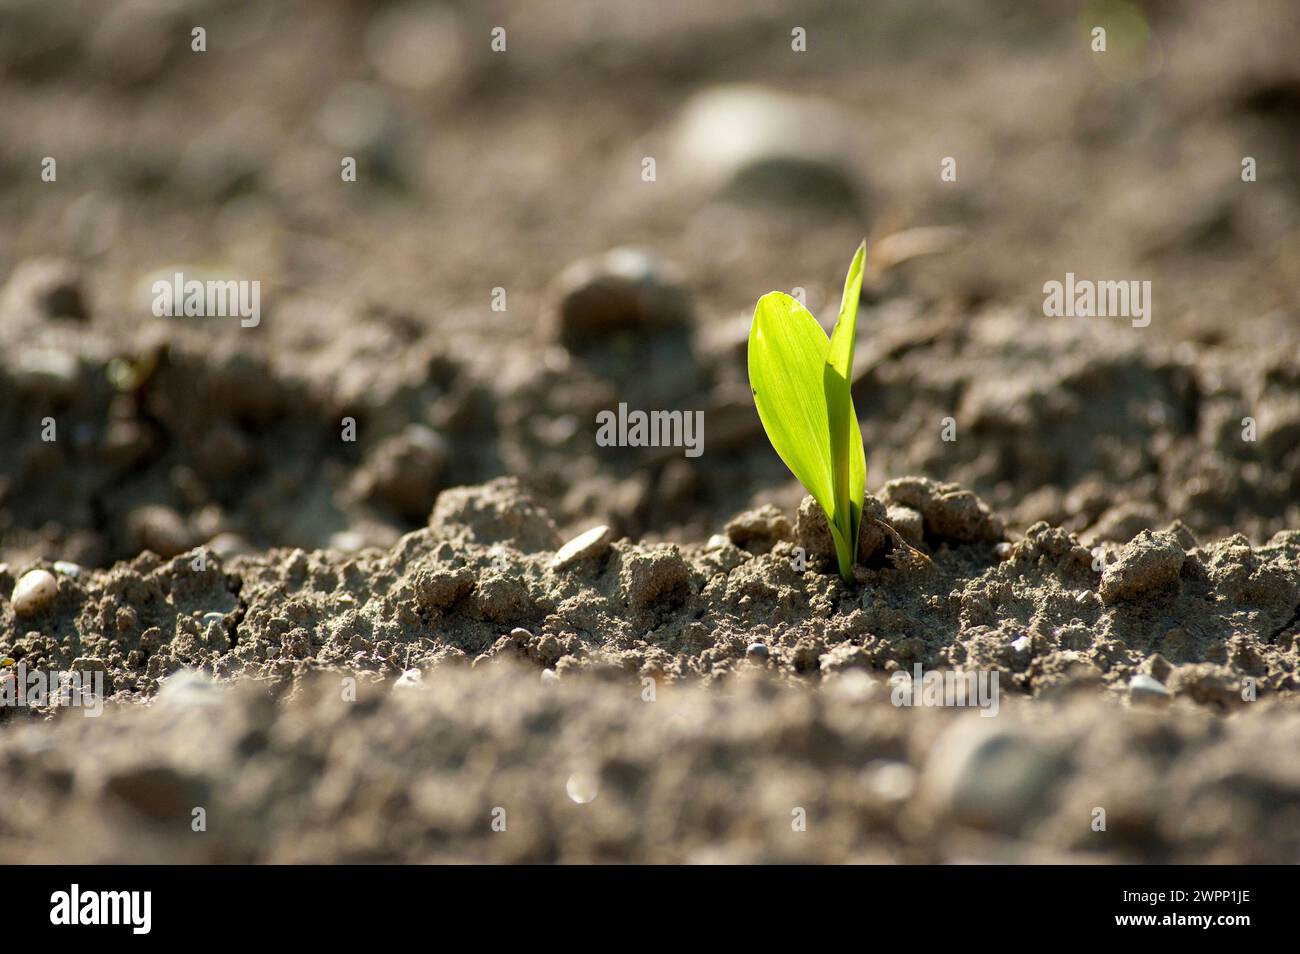 a young maize plant, shoot, sweetcorn Stock Photo